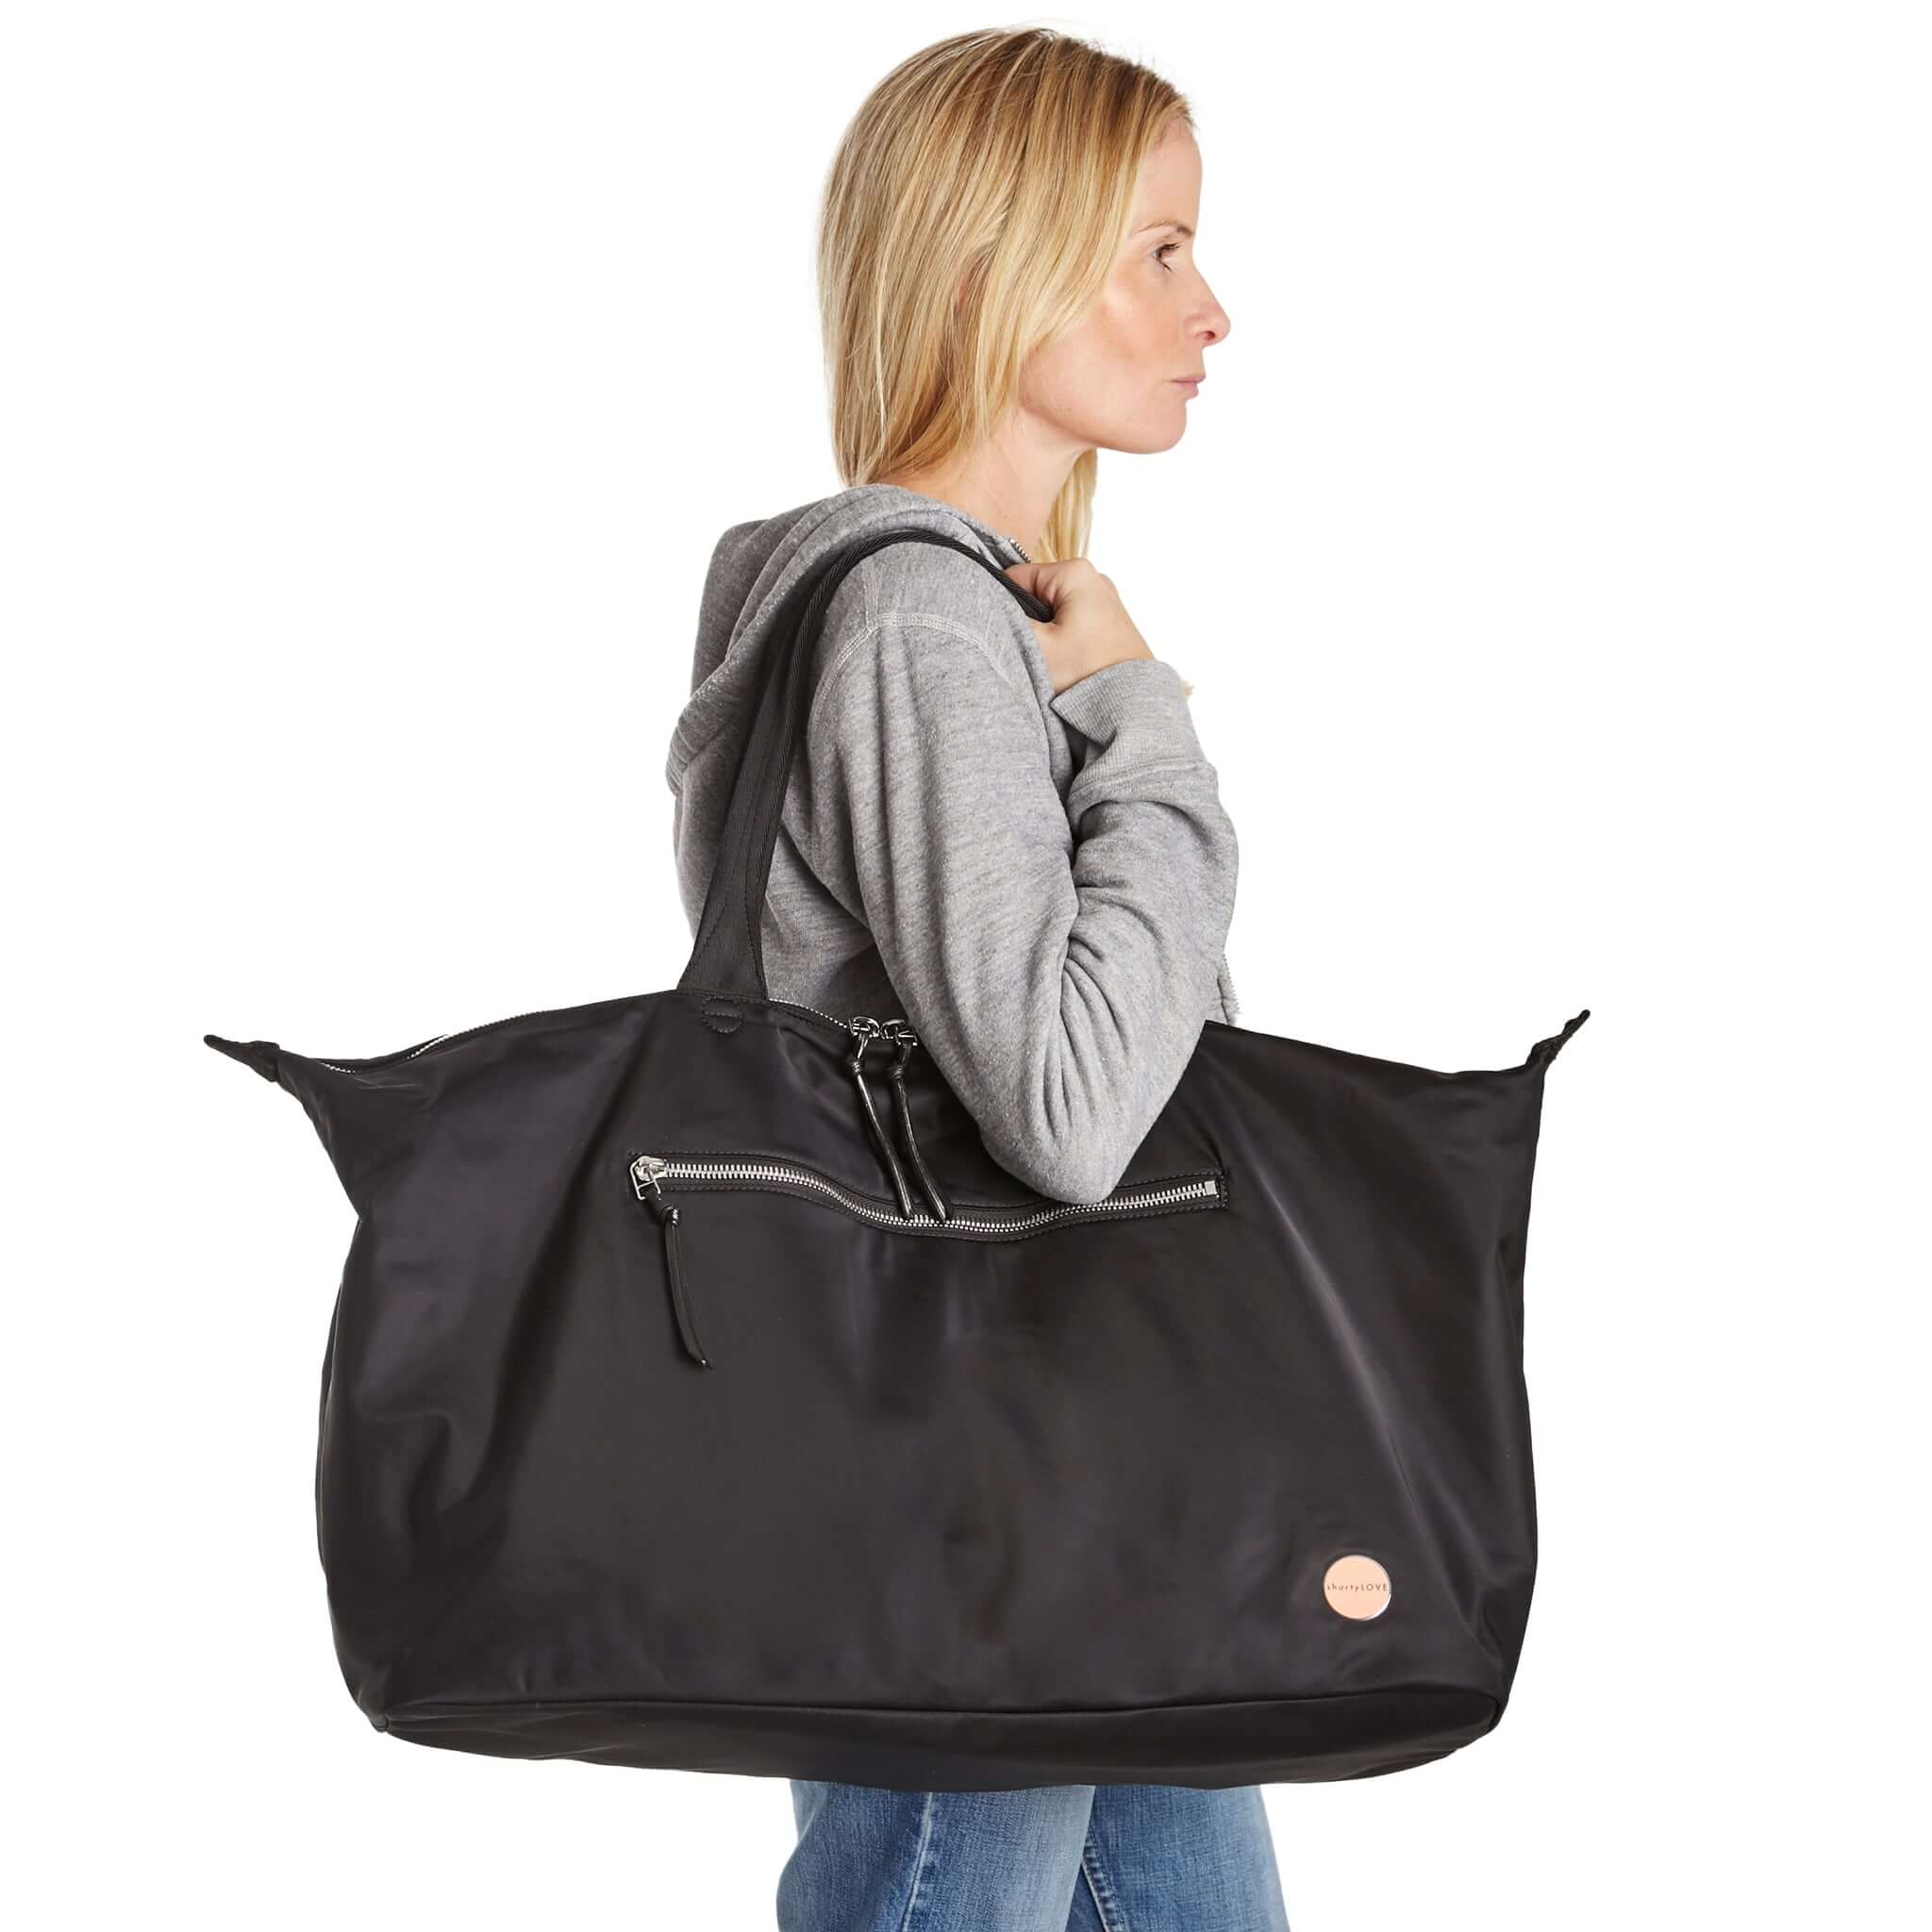 Women Duffle Travel Bags | Bags, Storage bags for clothes, Travel bags